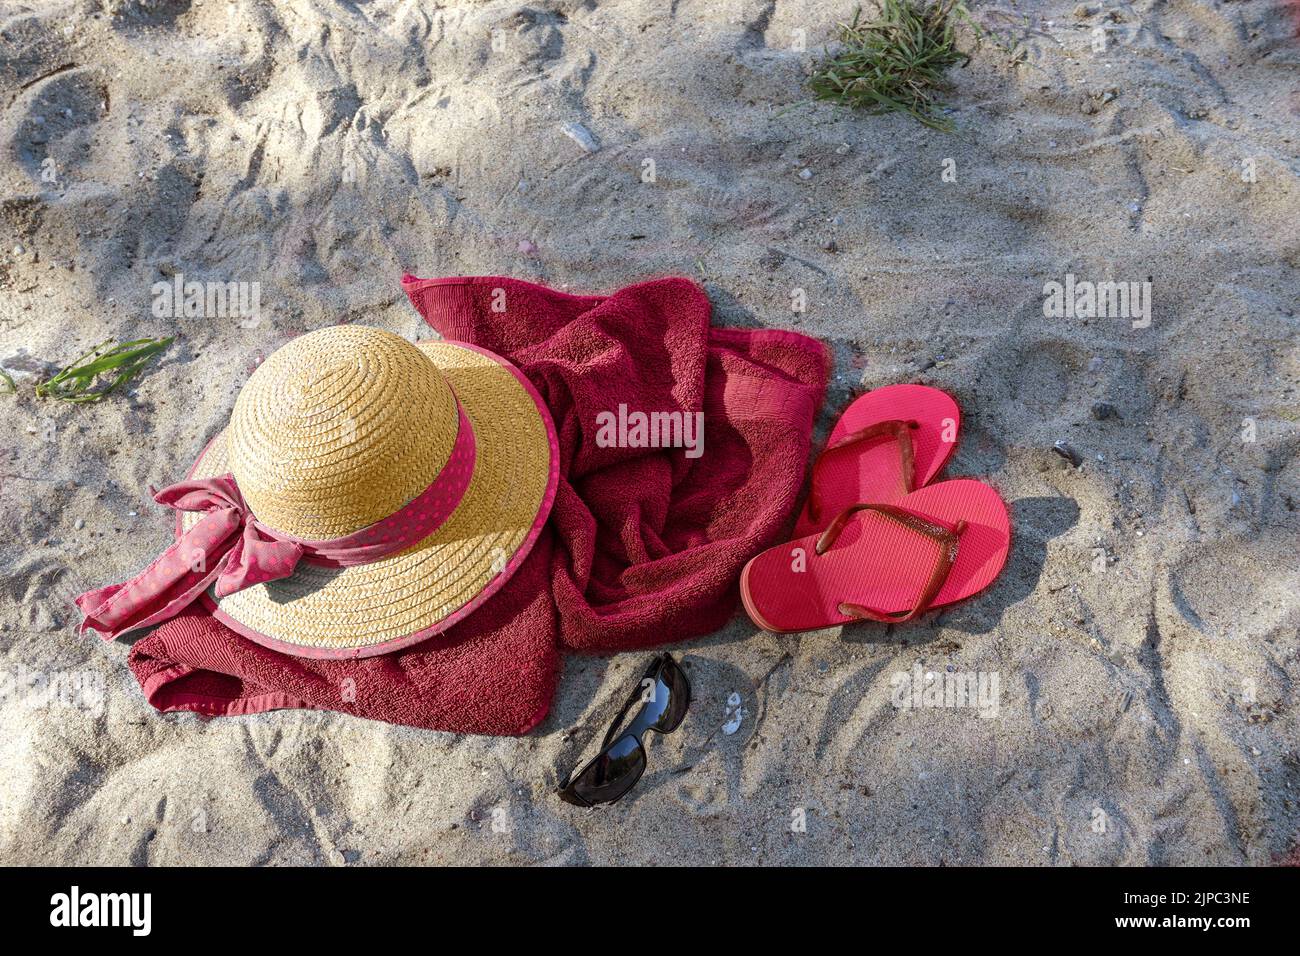 Summer beach vacations, straw hat and flip flops on a red towel in the sand near the tourist resort Boltenhagen, Baltic Sea, Germany, copy space, view Stock Photo